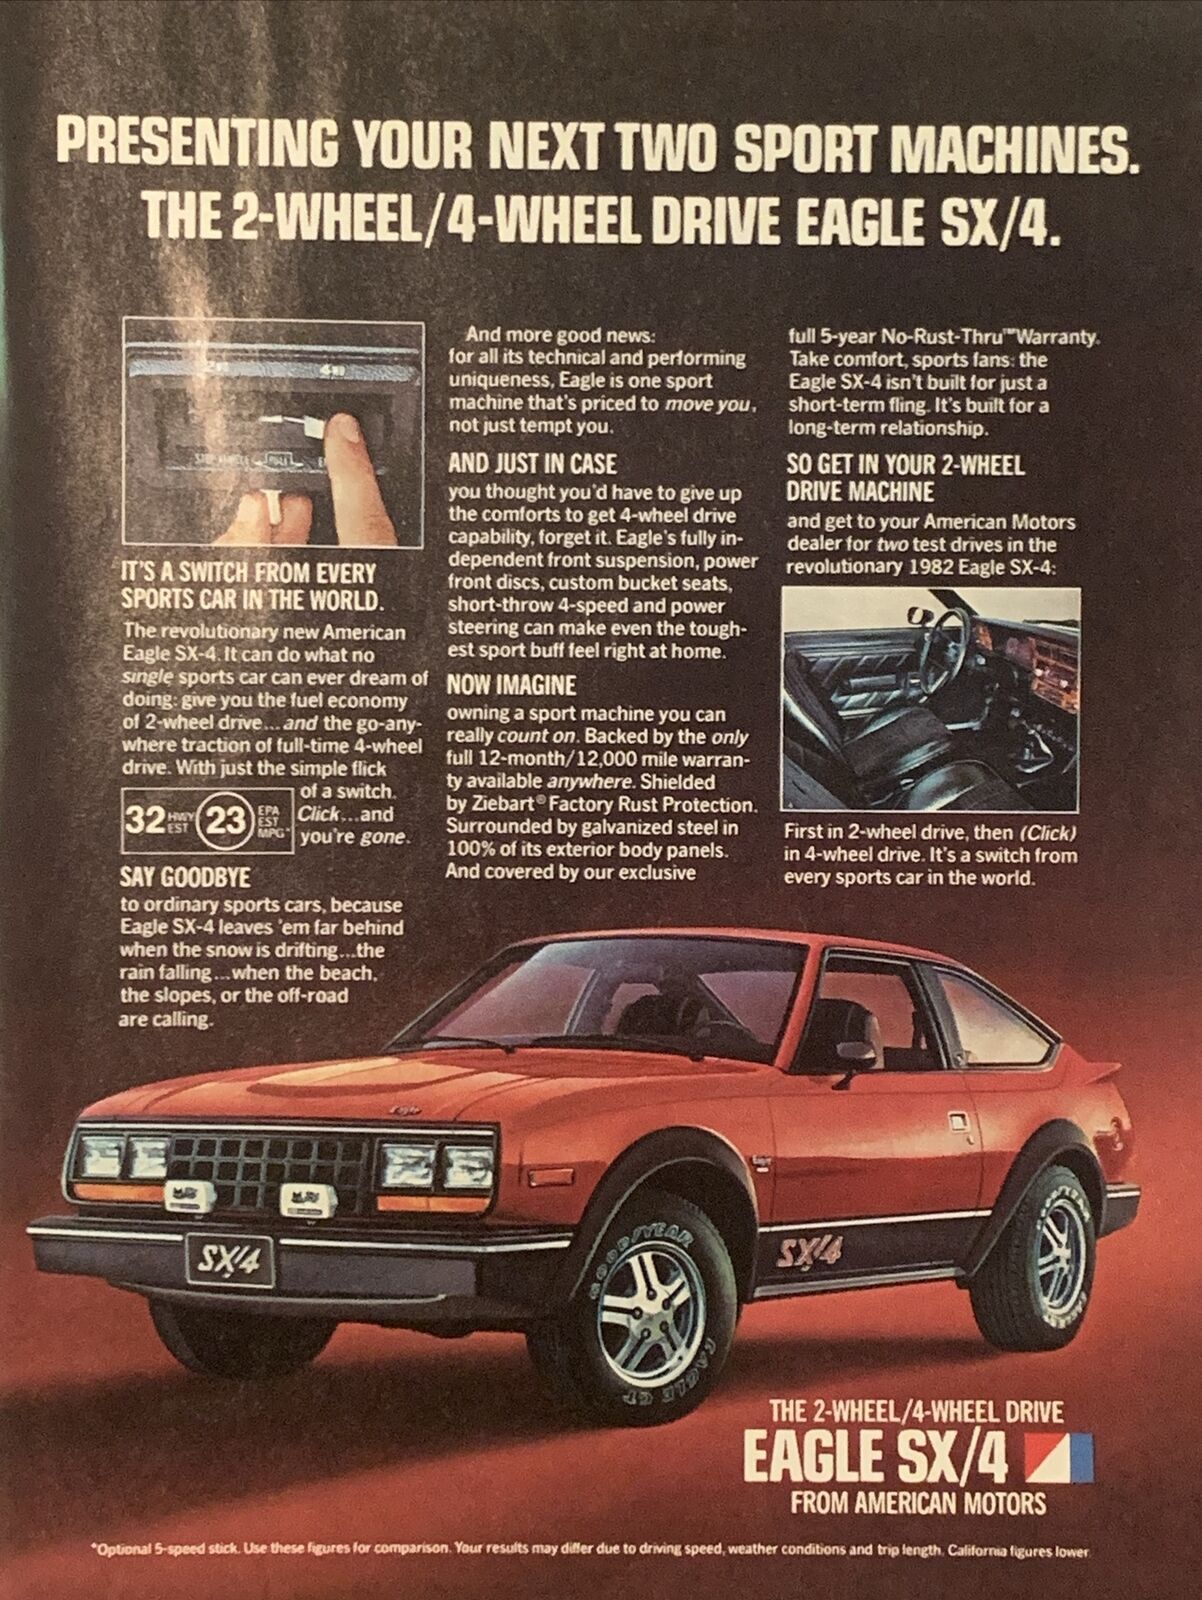 1982 AMC Eagle SX/4 VTG 1980s PRINT AD Sports Car - Flick Of Switch 2WD to 4WD